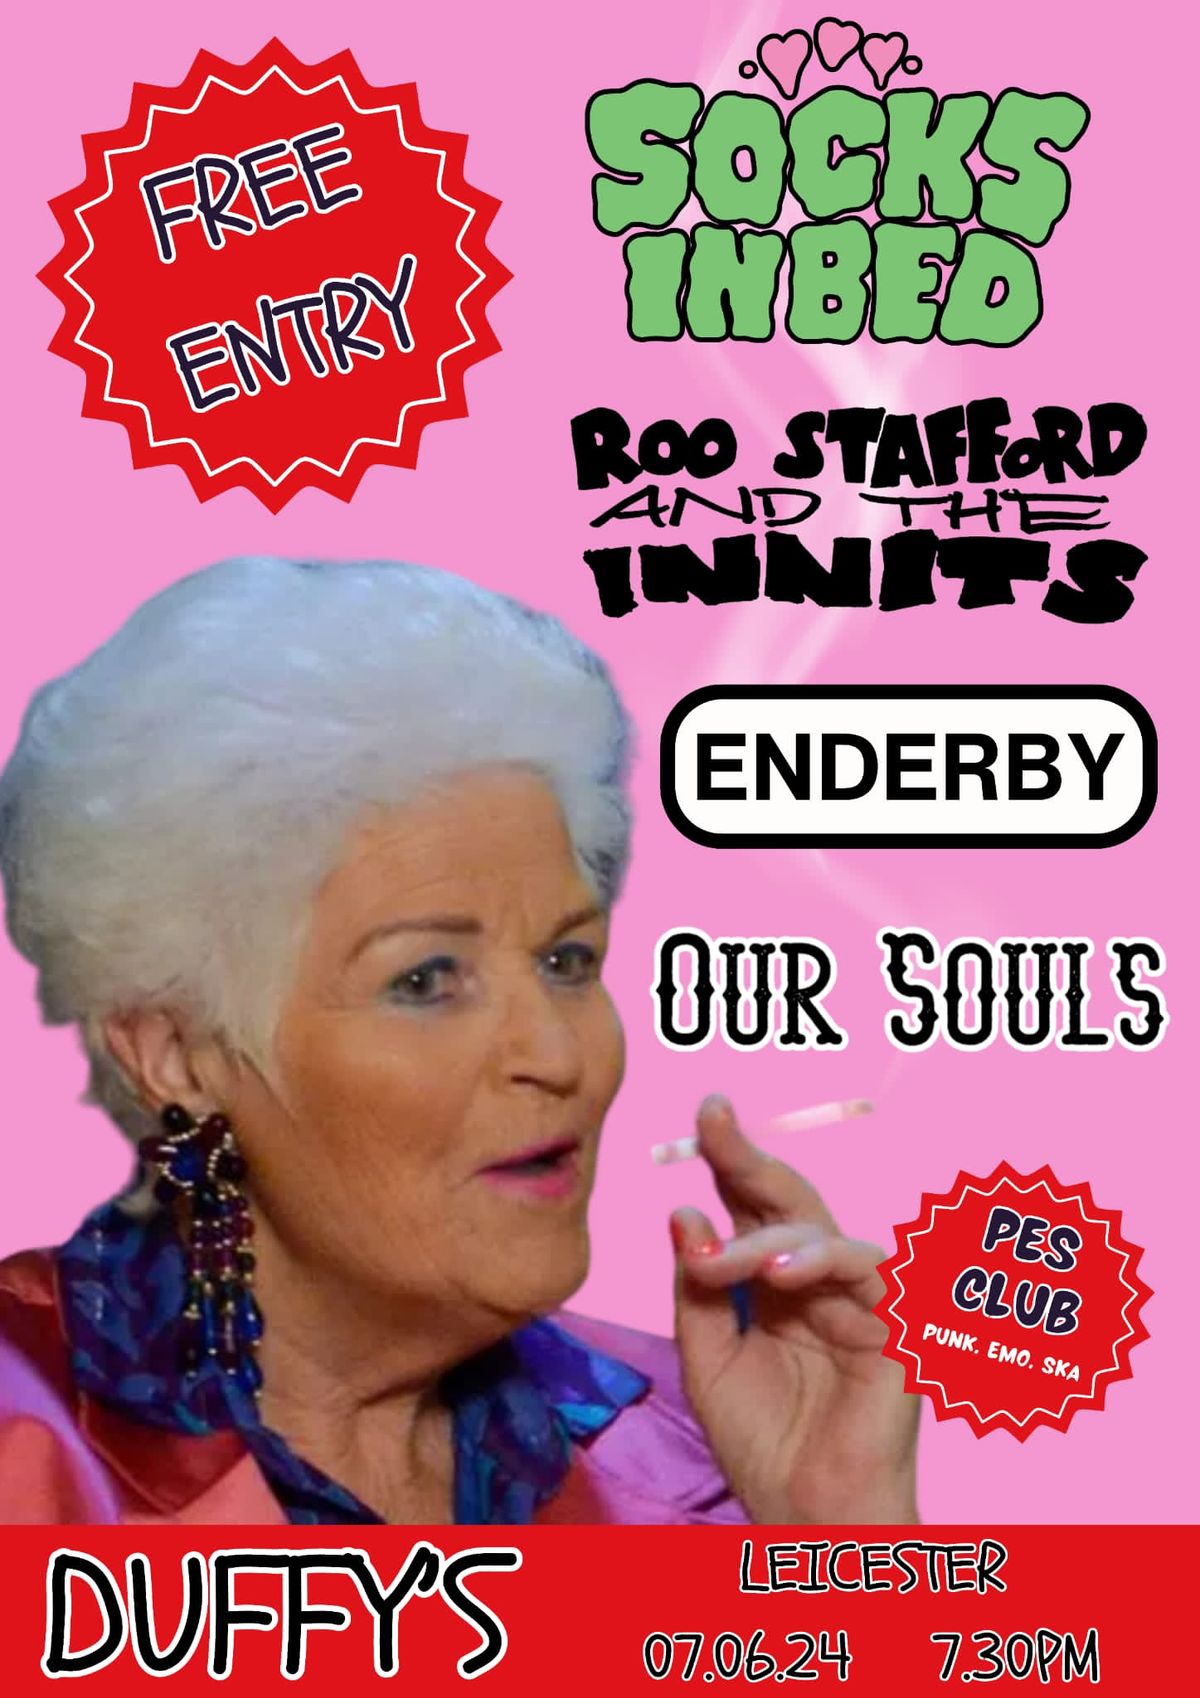 Our Souls, Socks In Bed, Enderby , Roo Stafford & The Innits FREE at Duffys